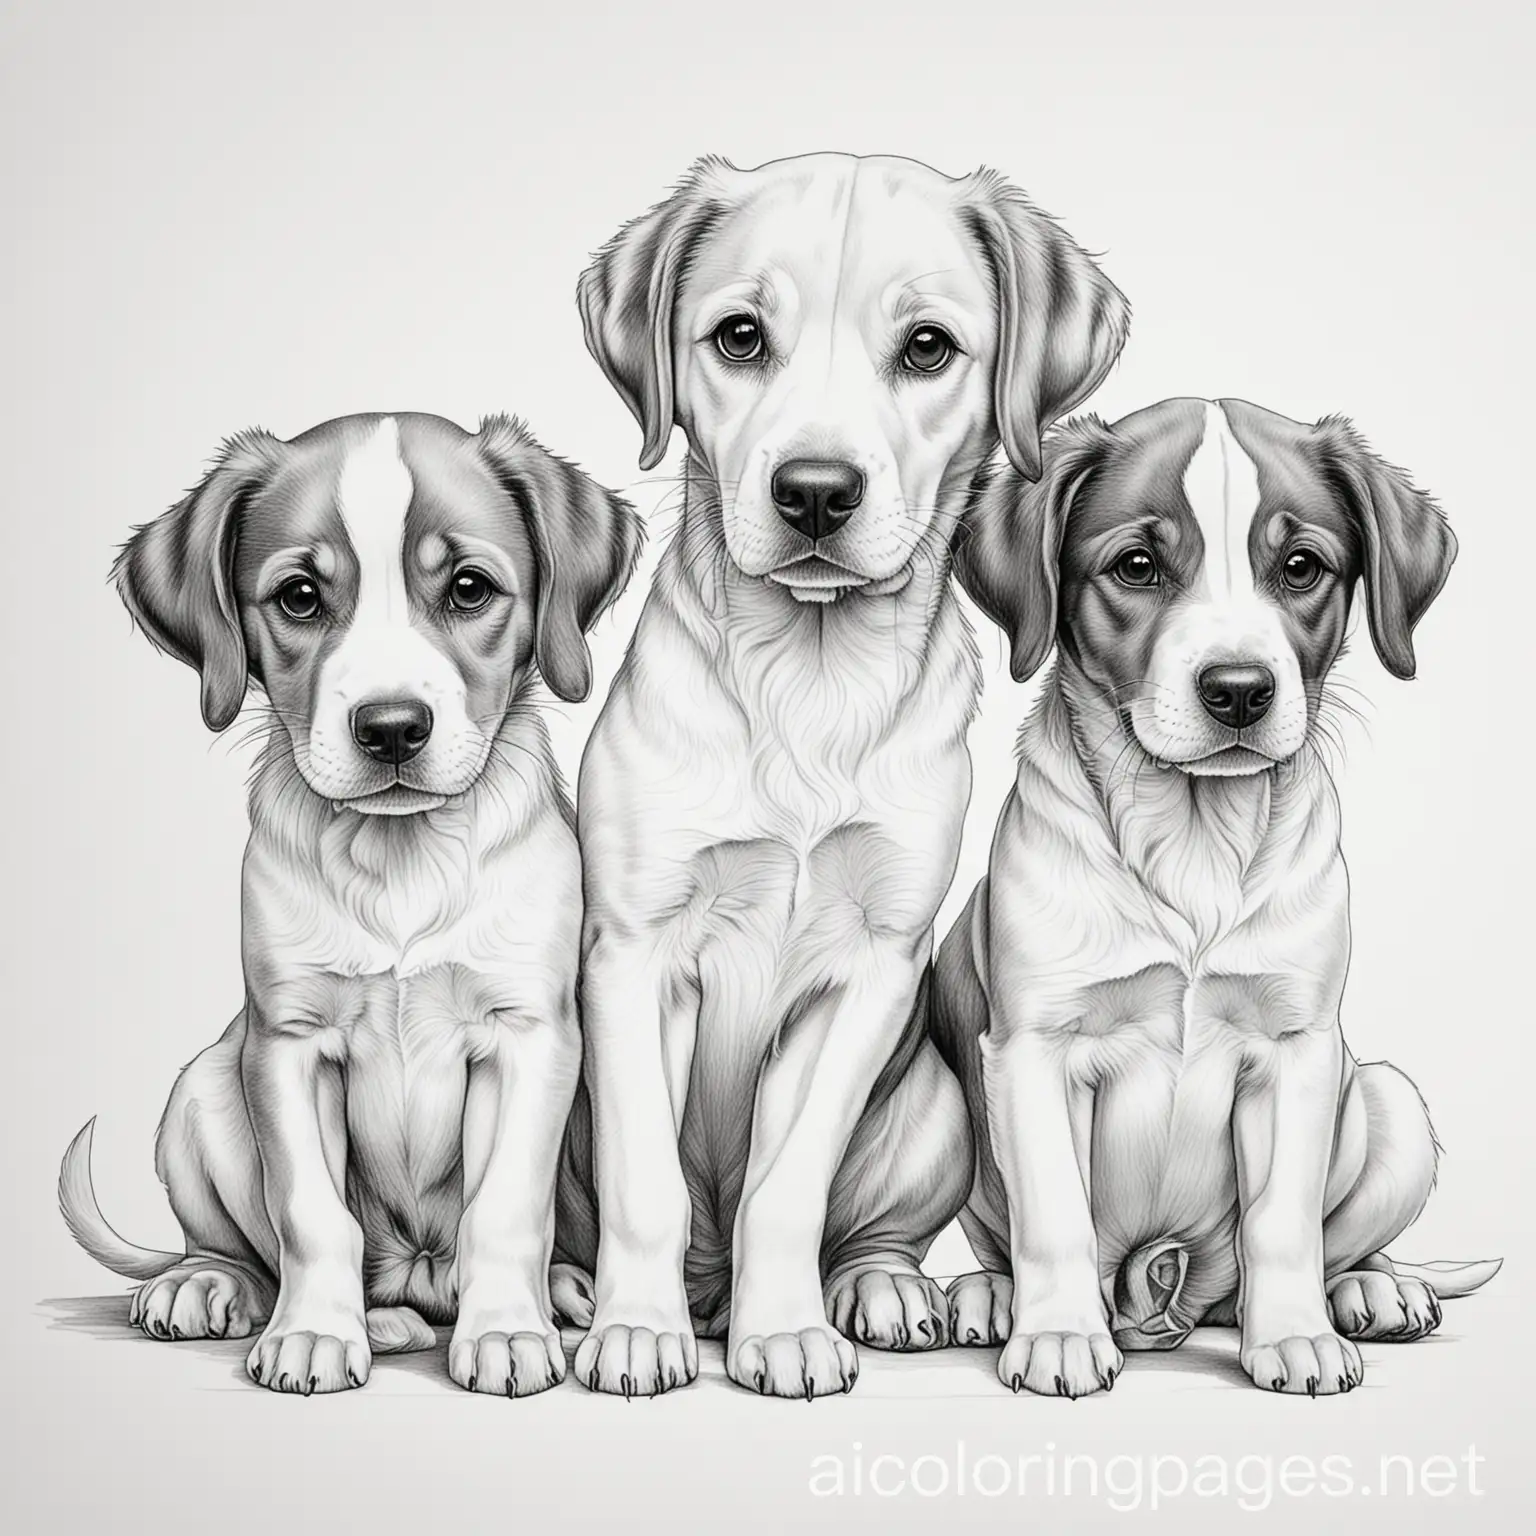 Dog-Coloring-Page-in-Black-and-White-Simple-Line-Art-on-White-Background